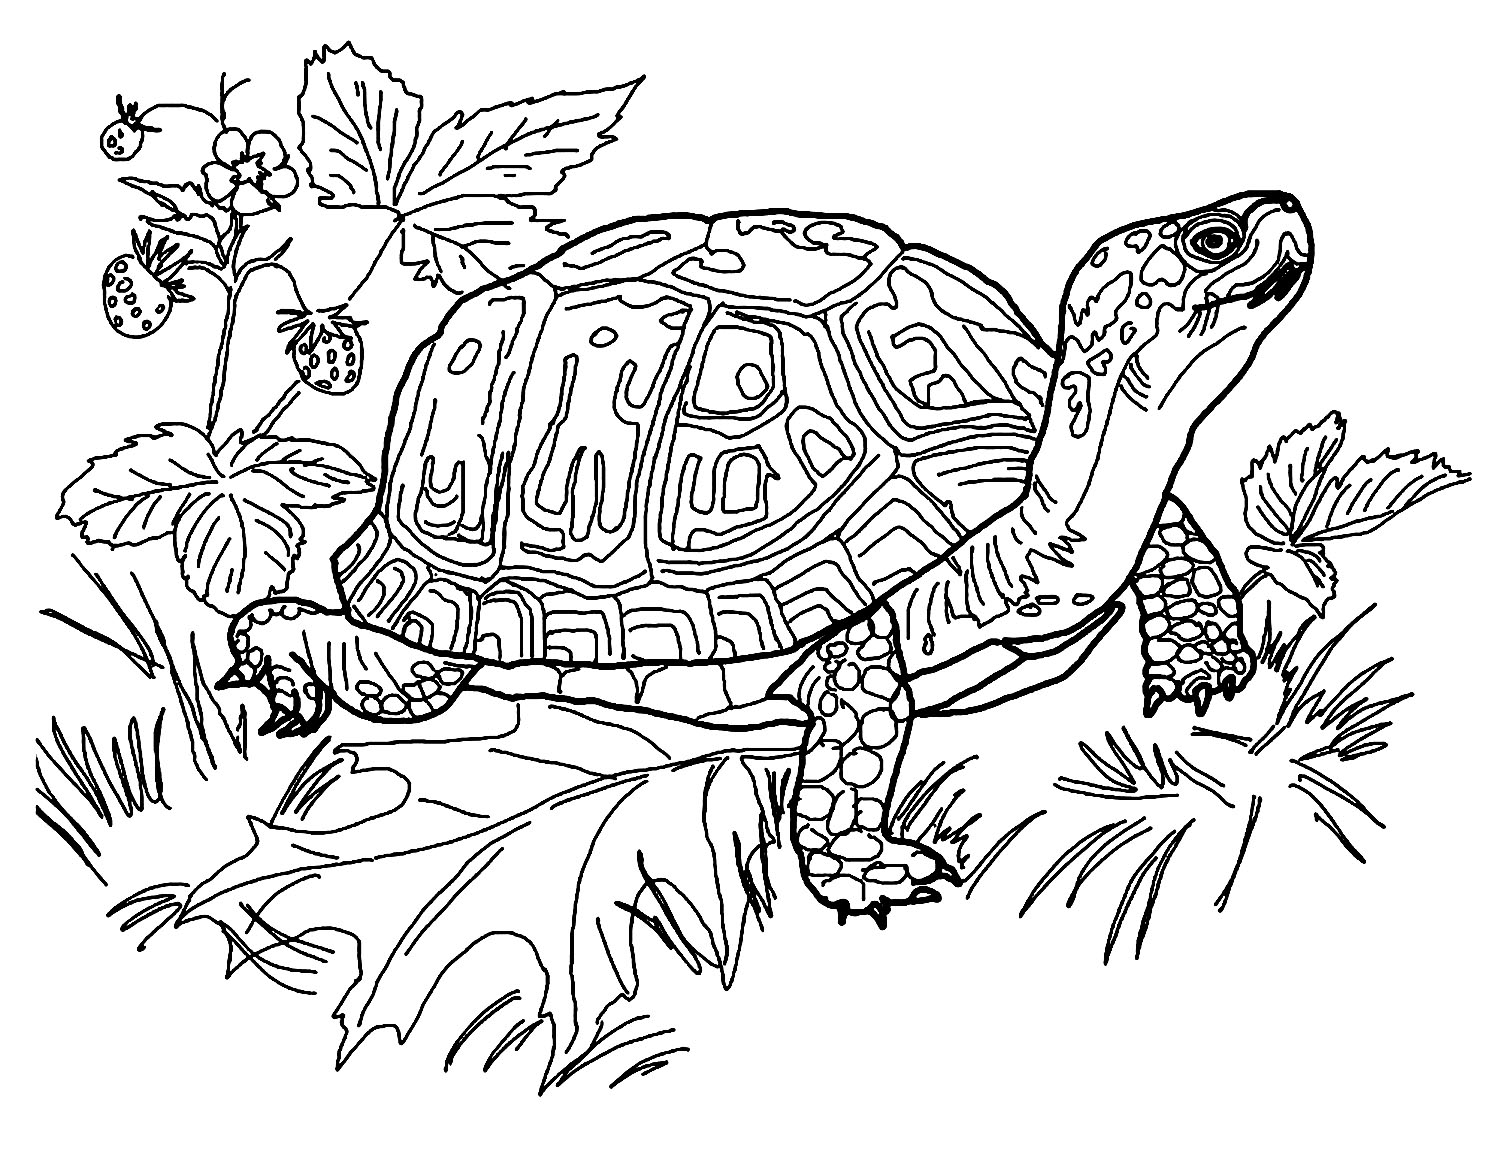 Download Turtles free to color for kids - Turtles Kids Coloring Pages